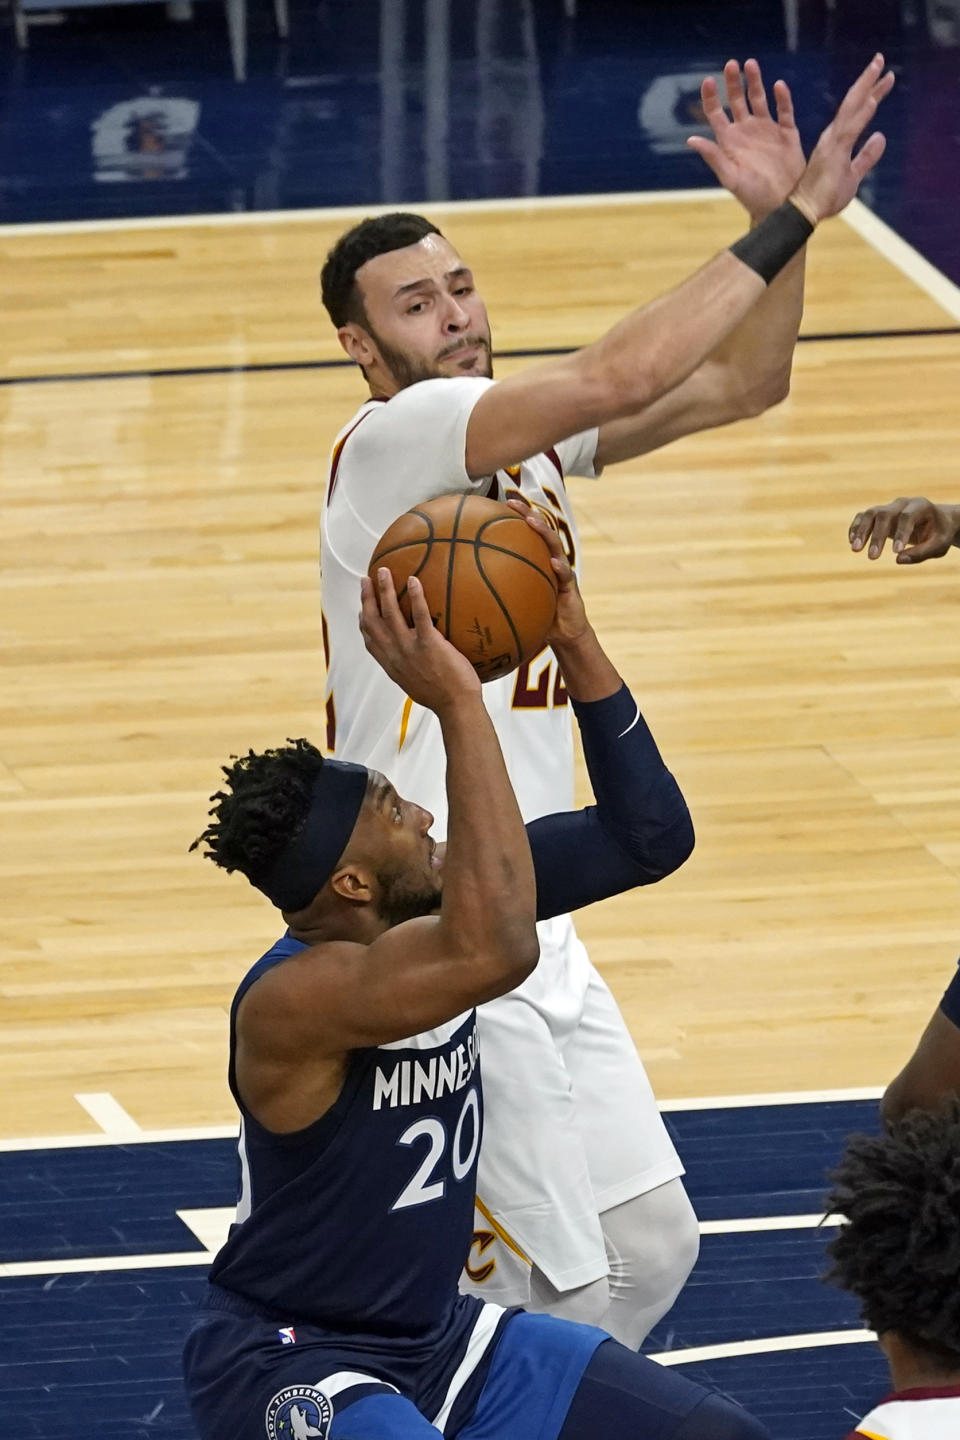 Minnesota Timberwolves' Josh Okogie (20) looks to shoot as Cleveland Cavaliers' Larry Nance Jr. (22) defends in the first half of an NBA basketball game Sunday, Jan. 31, 2021, in Minneapolis. (AP Photo/Jim Mone)